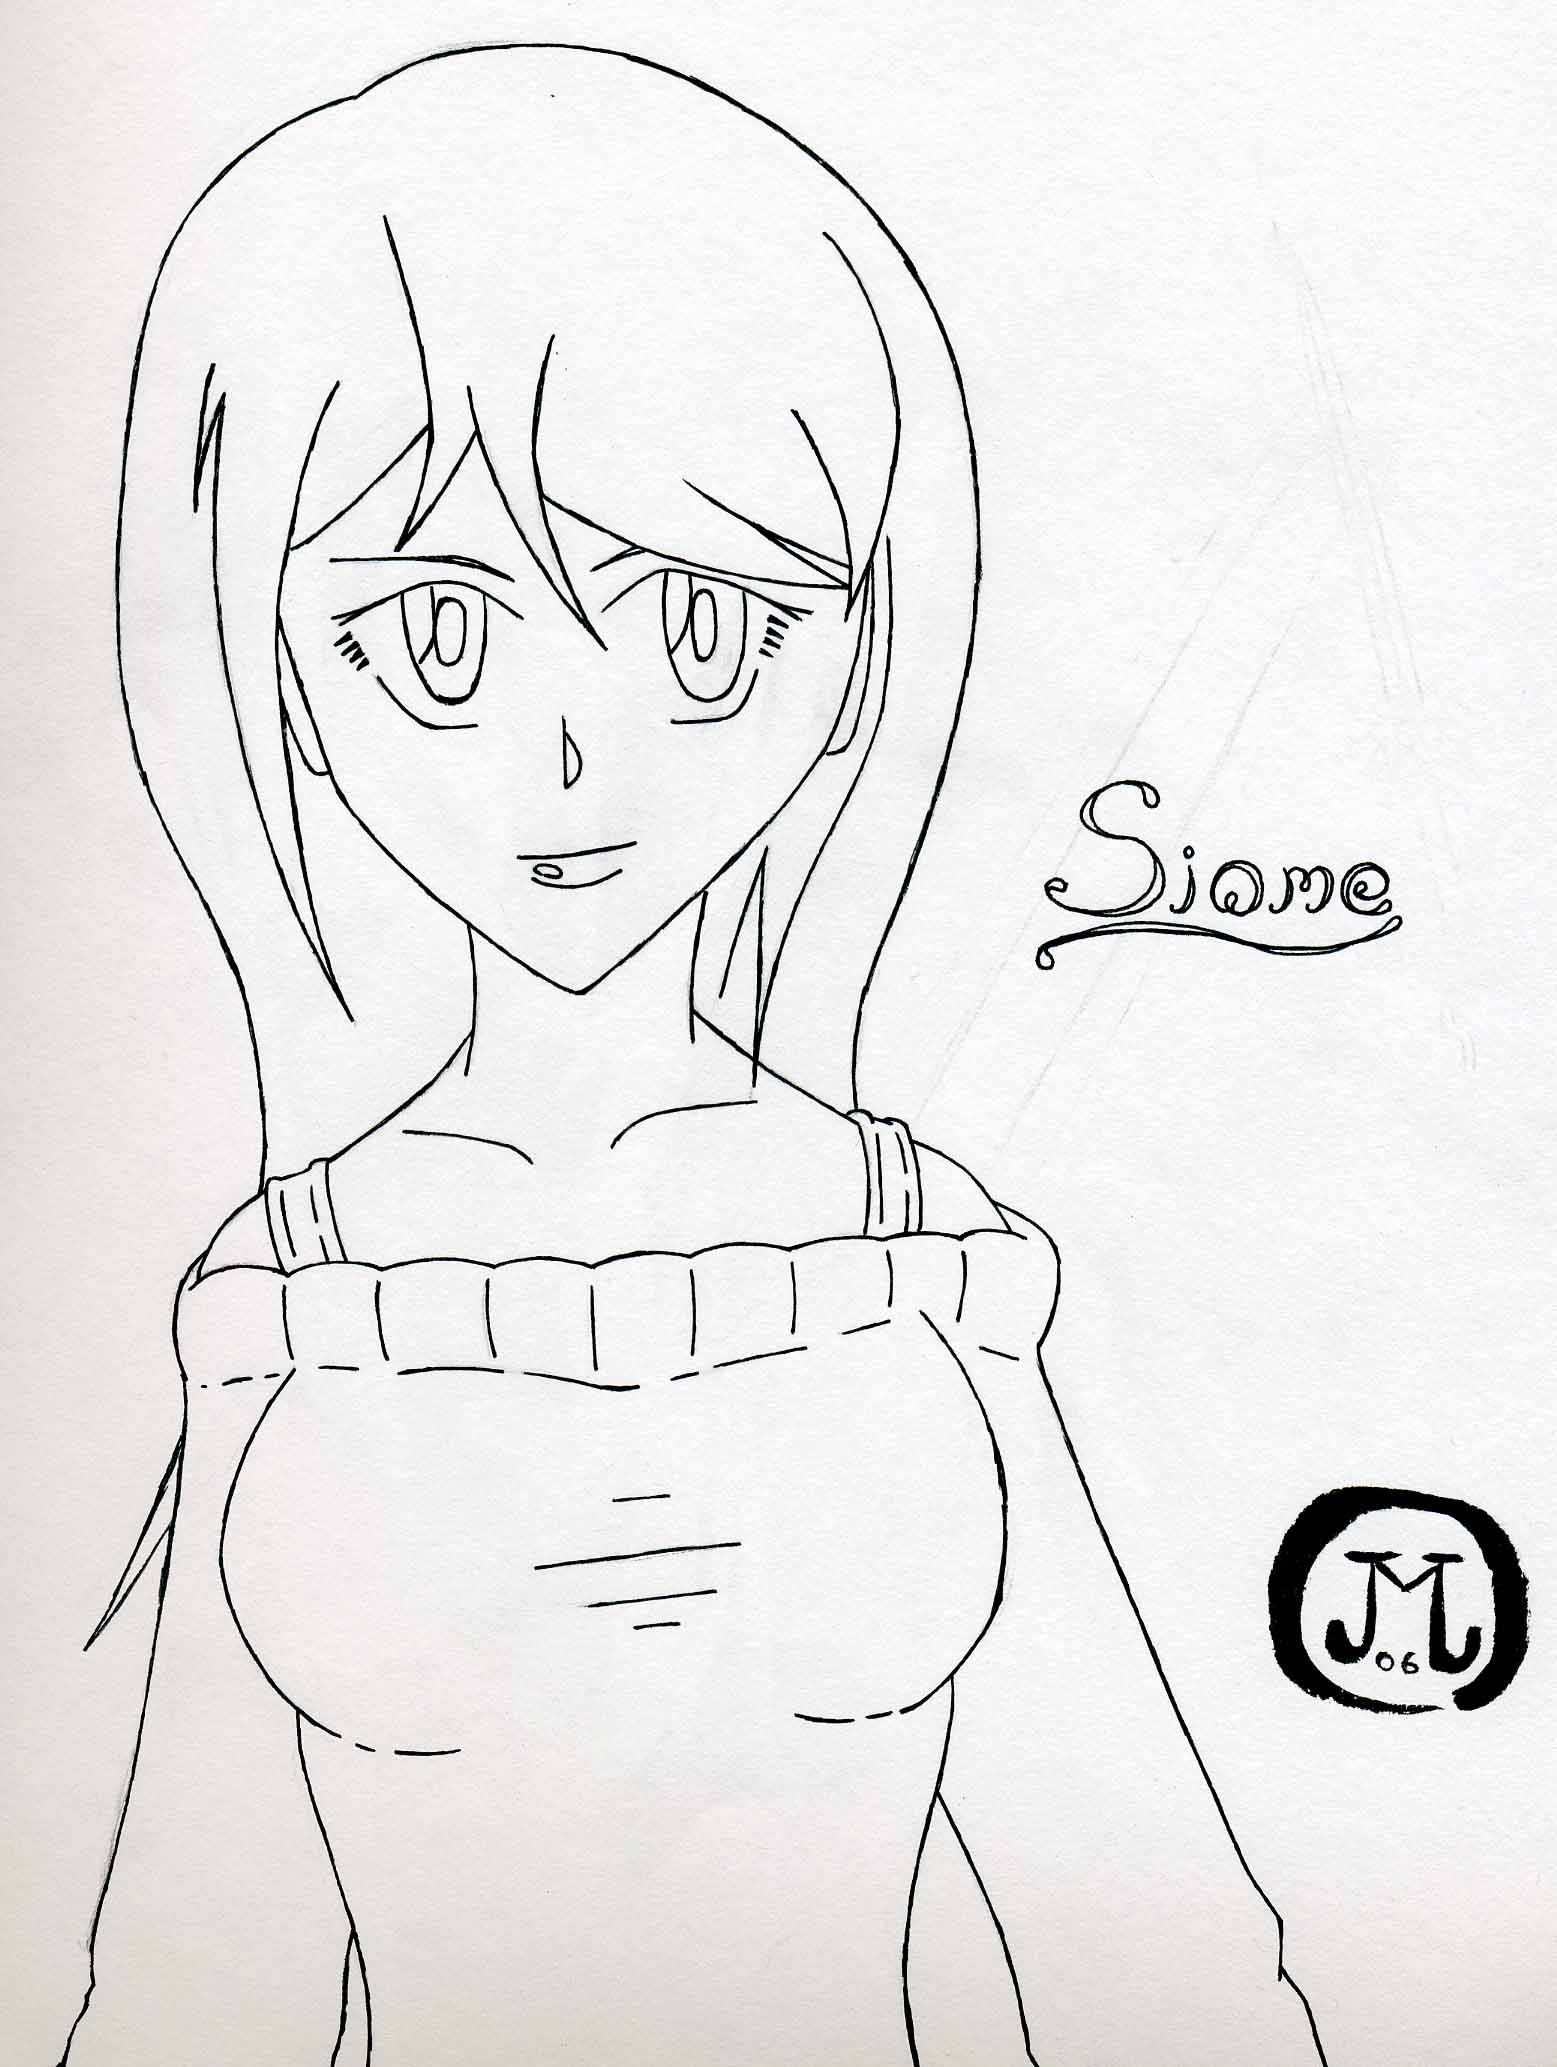 Siome (Request from Pencil_Drawn_Wolf) (Uncolored) by Achlys33303